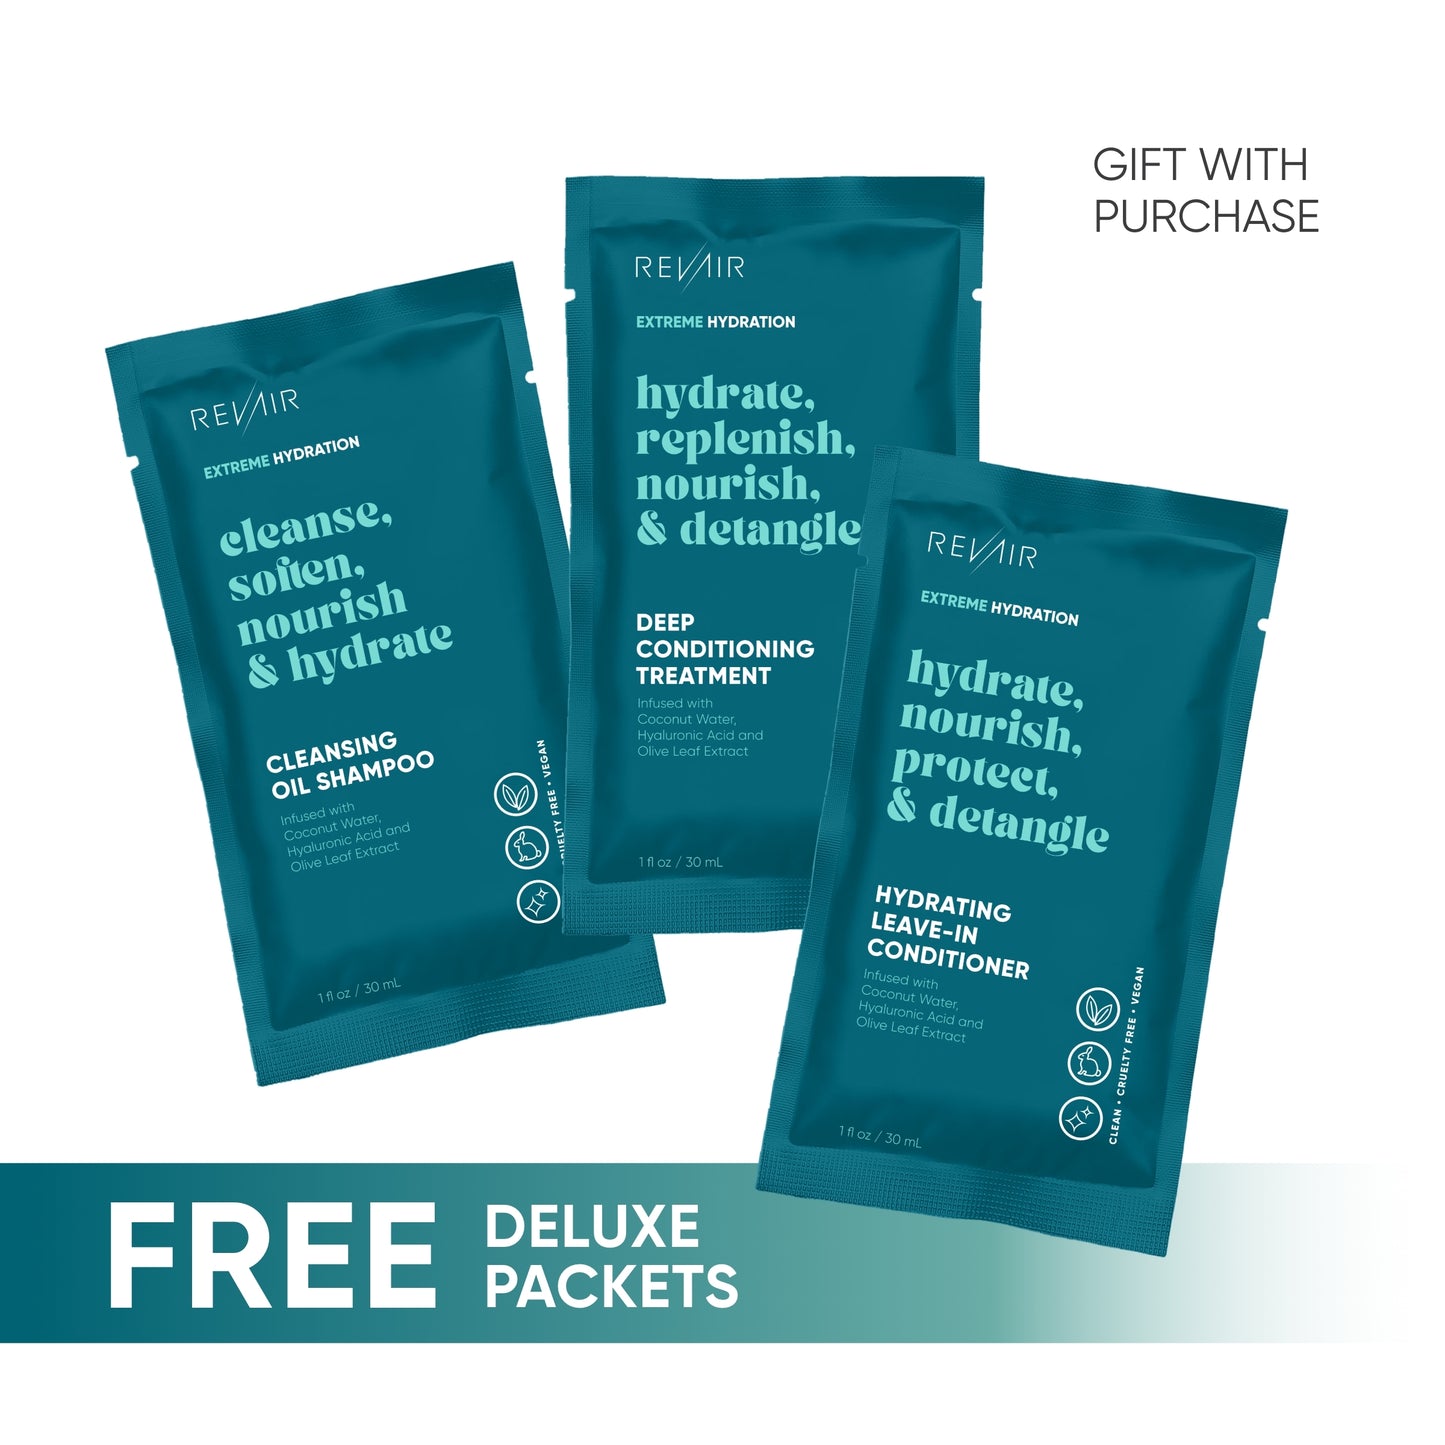 Deluxe Packets